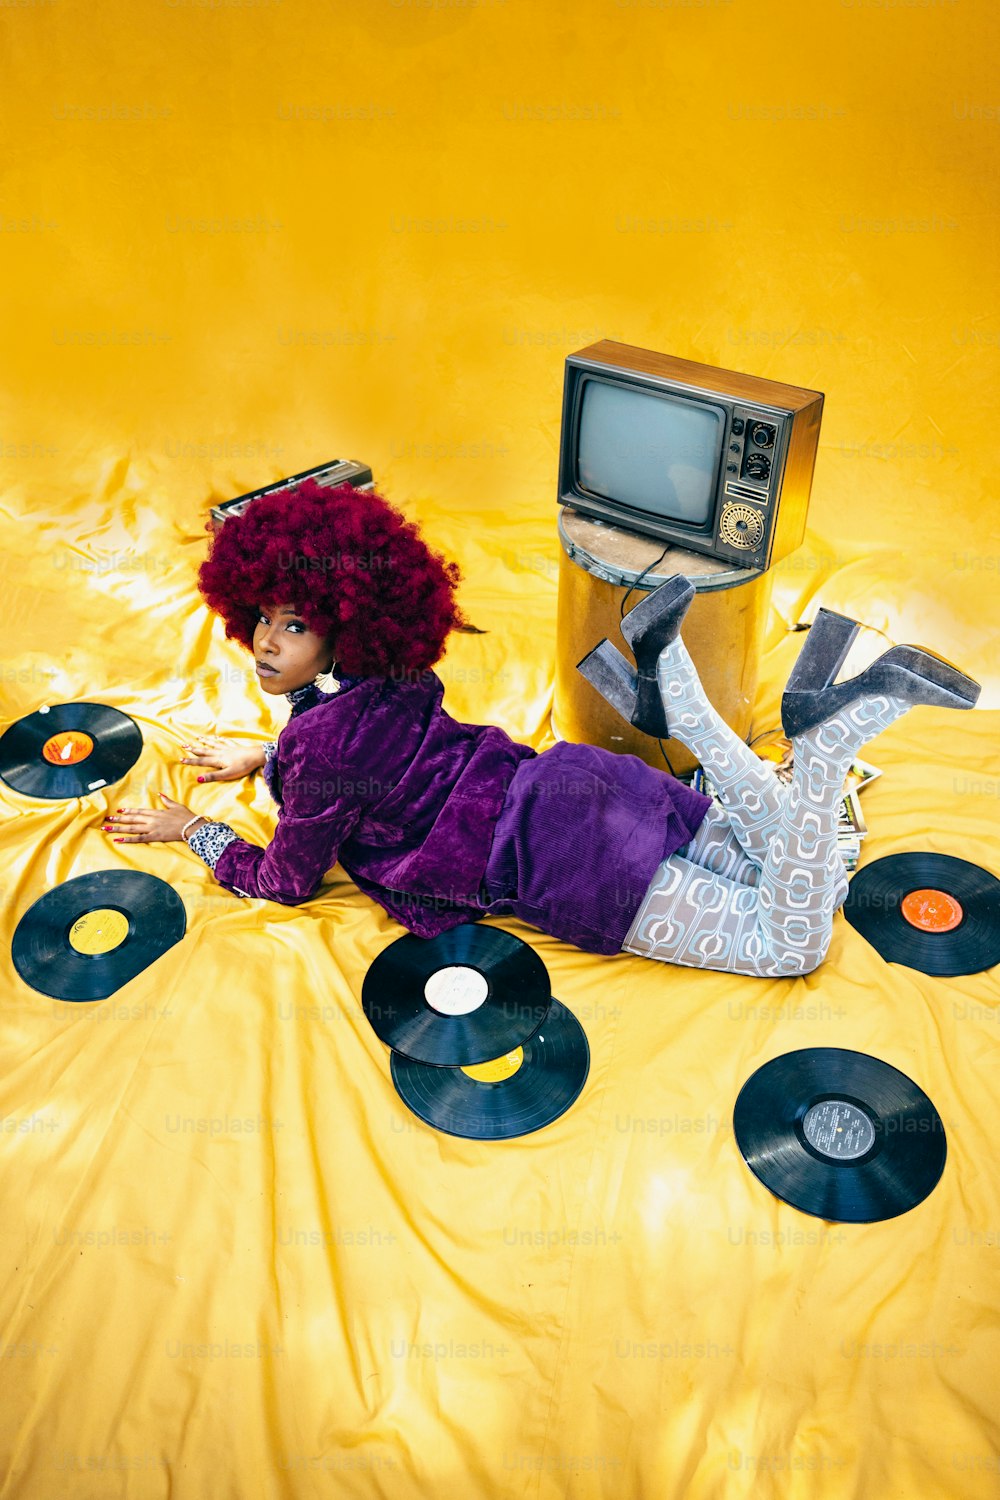 a woman laying on top of a bed covered in records